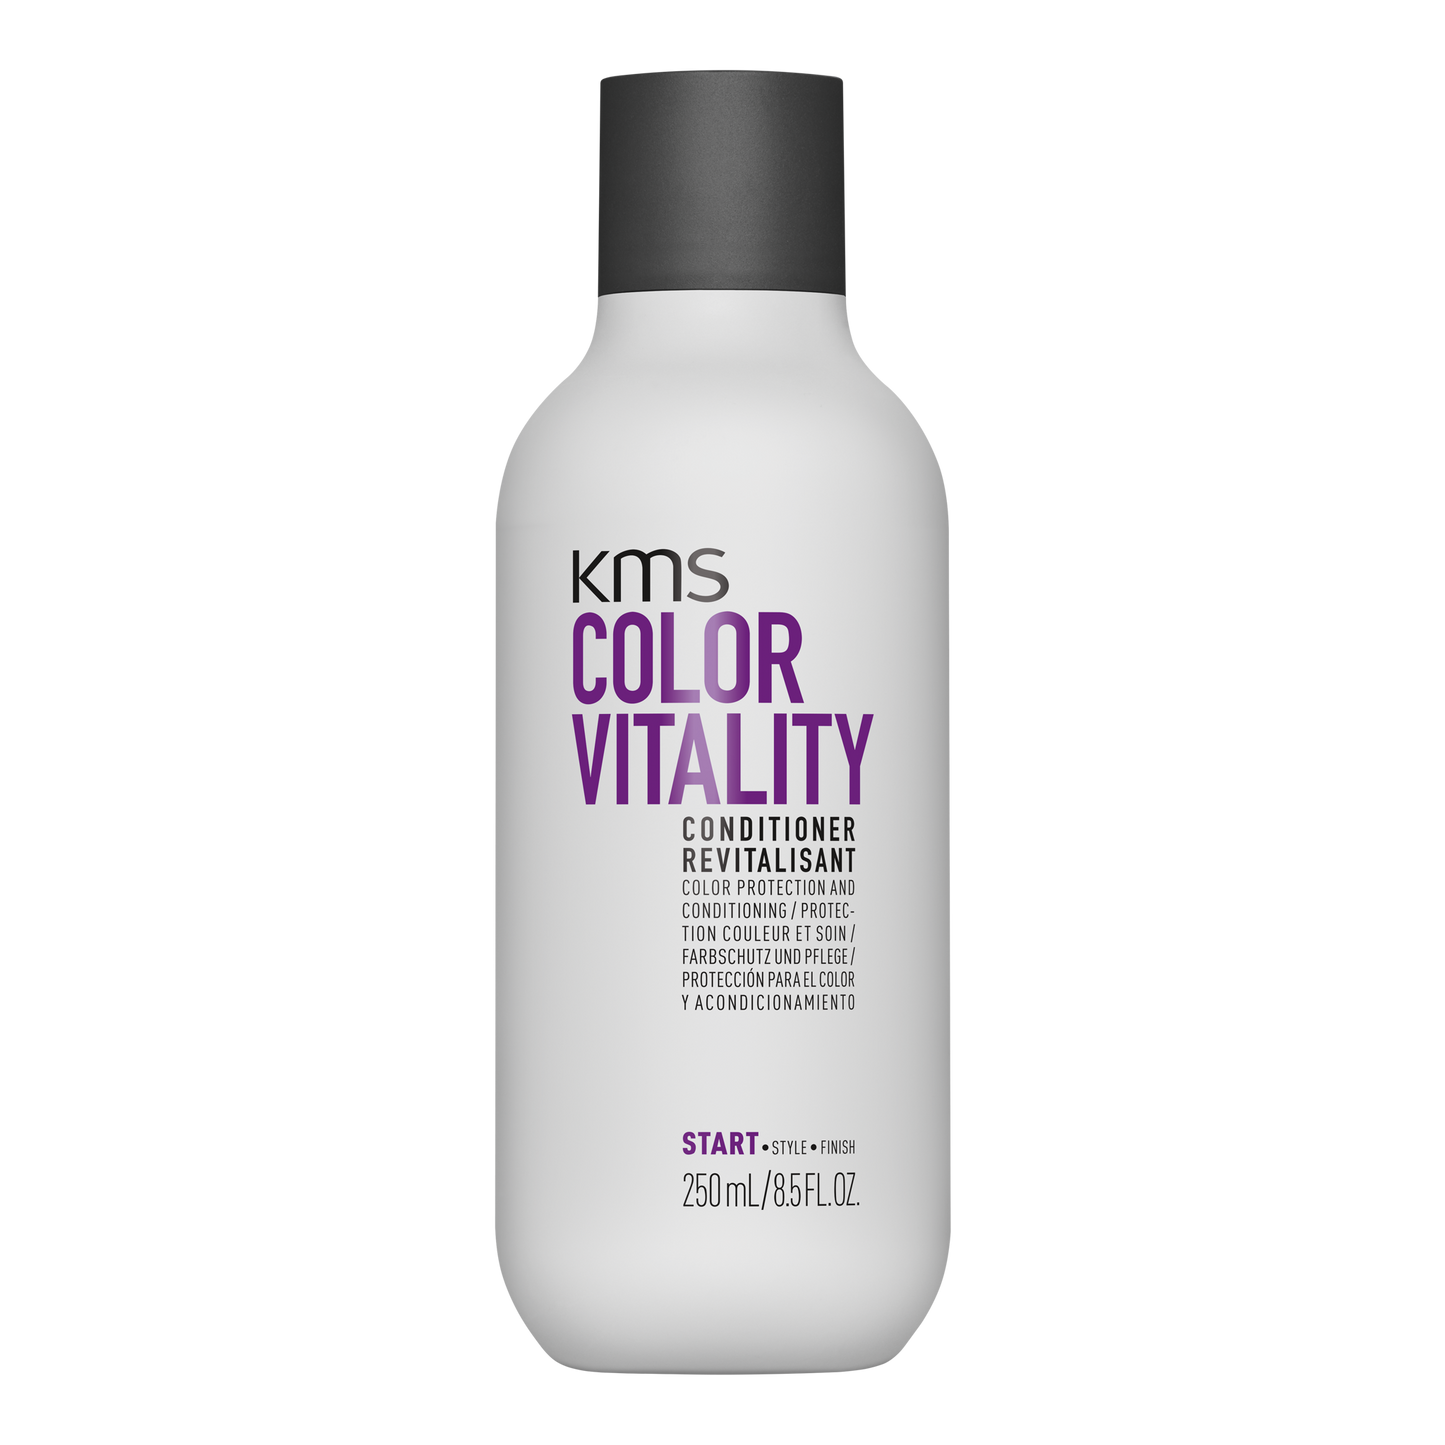 KMS COLORVITALITY Conditioner 250mL